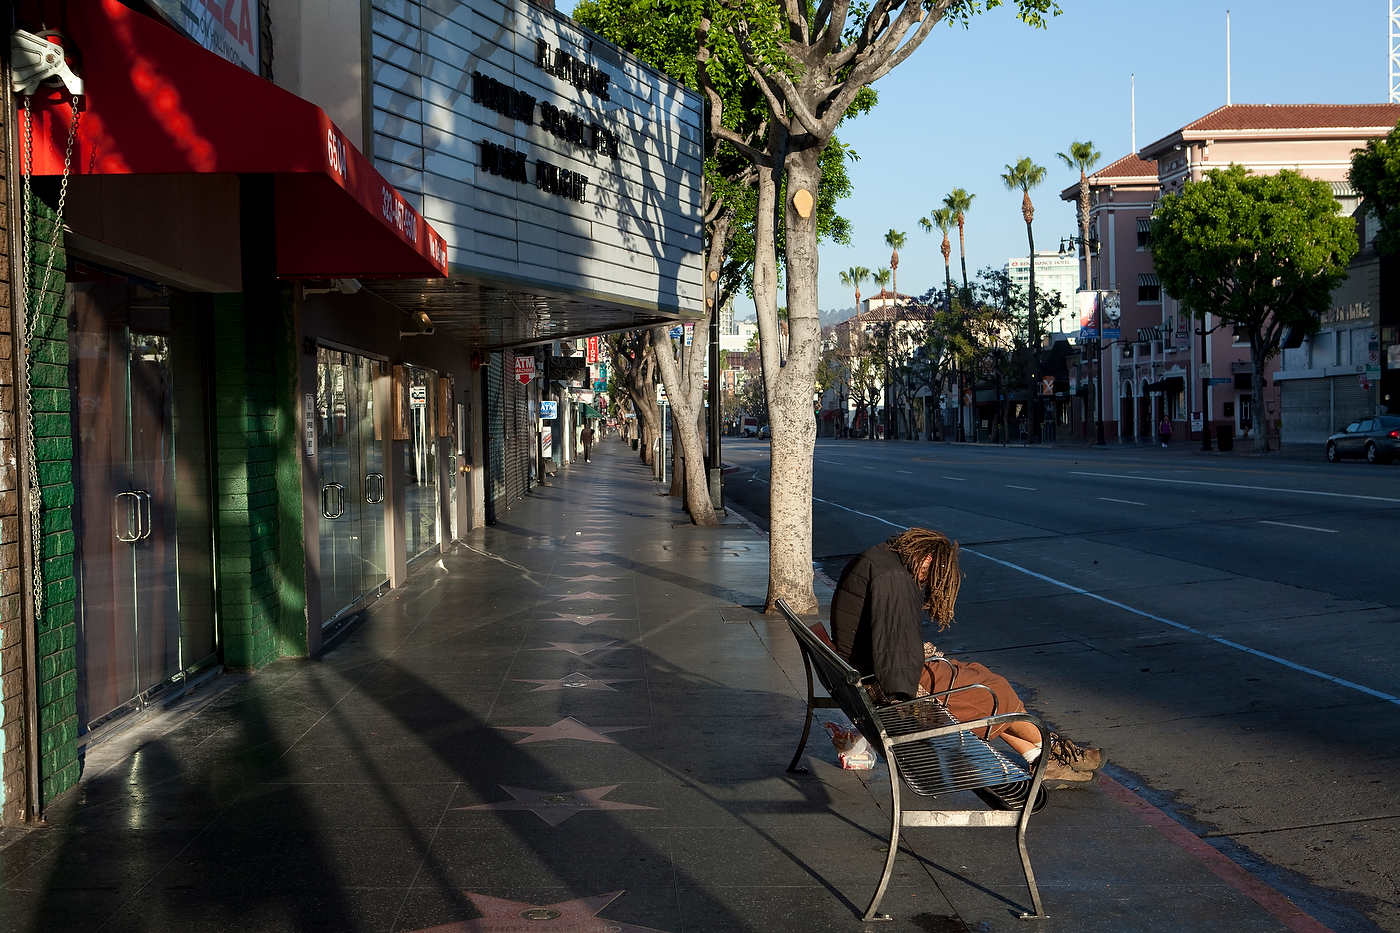 Homeless, early morning on Hollywood Boulevard, Line 302.